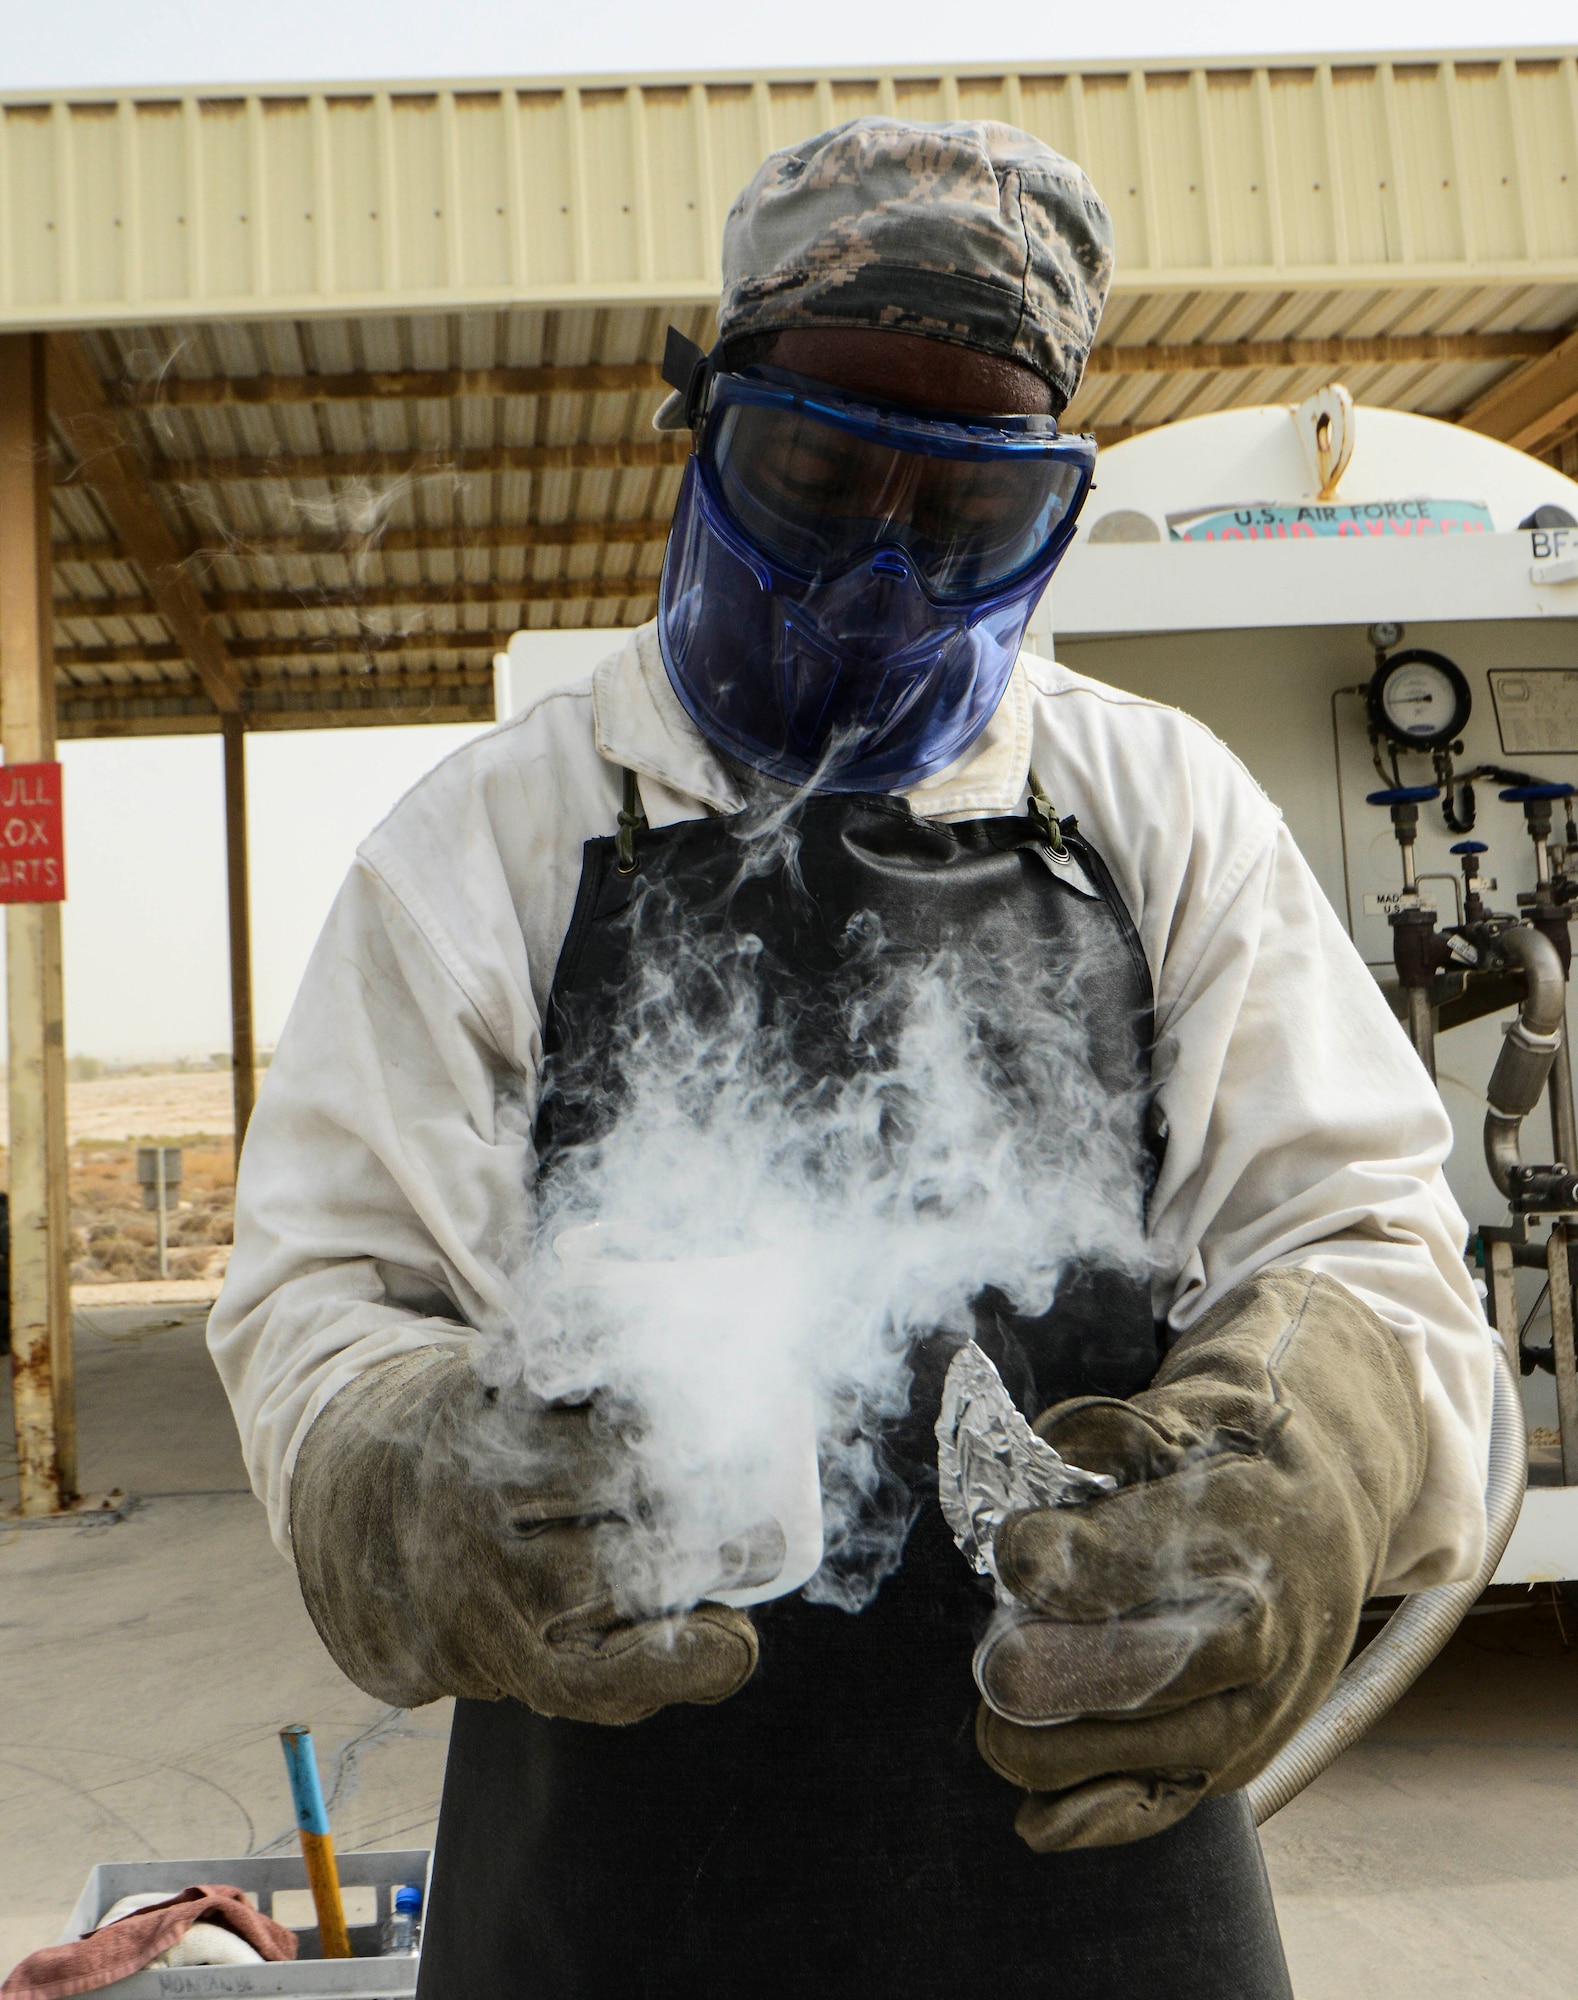 Senior Airman Donte Hatcher, 379th Expeditionary Logistics Readiness Squadron fuels cryogenic operator, takes an odor sample of the liquid oxygen tank to ensure its safety during an inspection Aug. 5, 2016, at Al Udeid Air Base, Qatar. The cryogenics team has the capability to ship their products to multiple locations in the U.S. Air Forces Central Command area of responsibility. (U.S. Air Force photo/Senior Airman Janelle Patiño/Released)